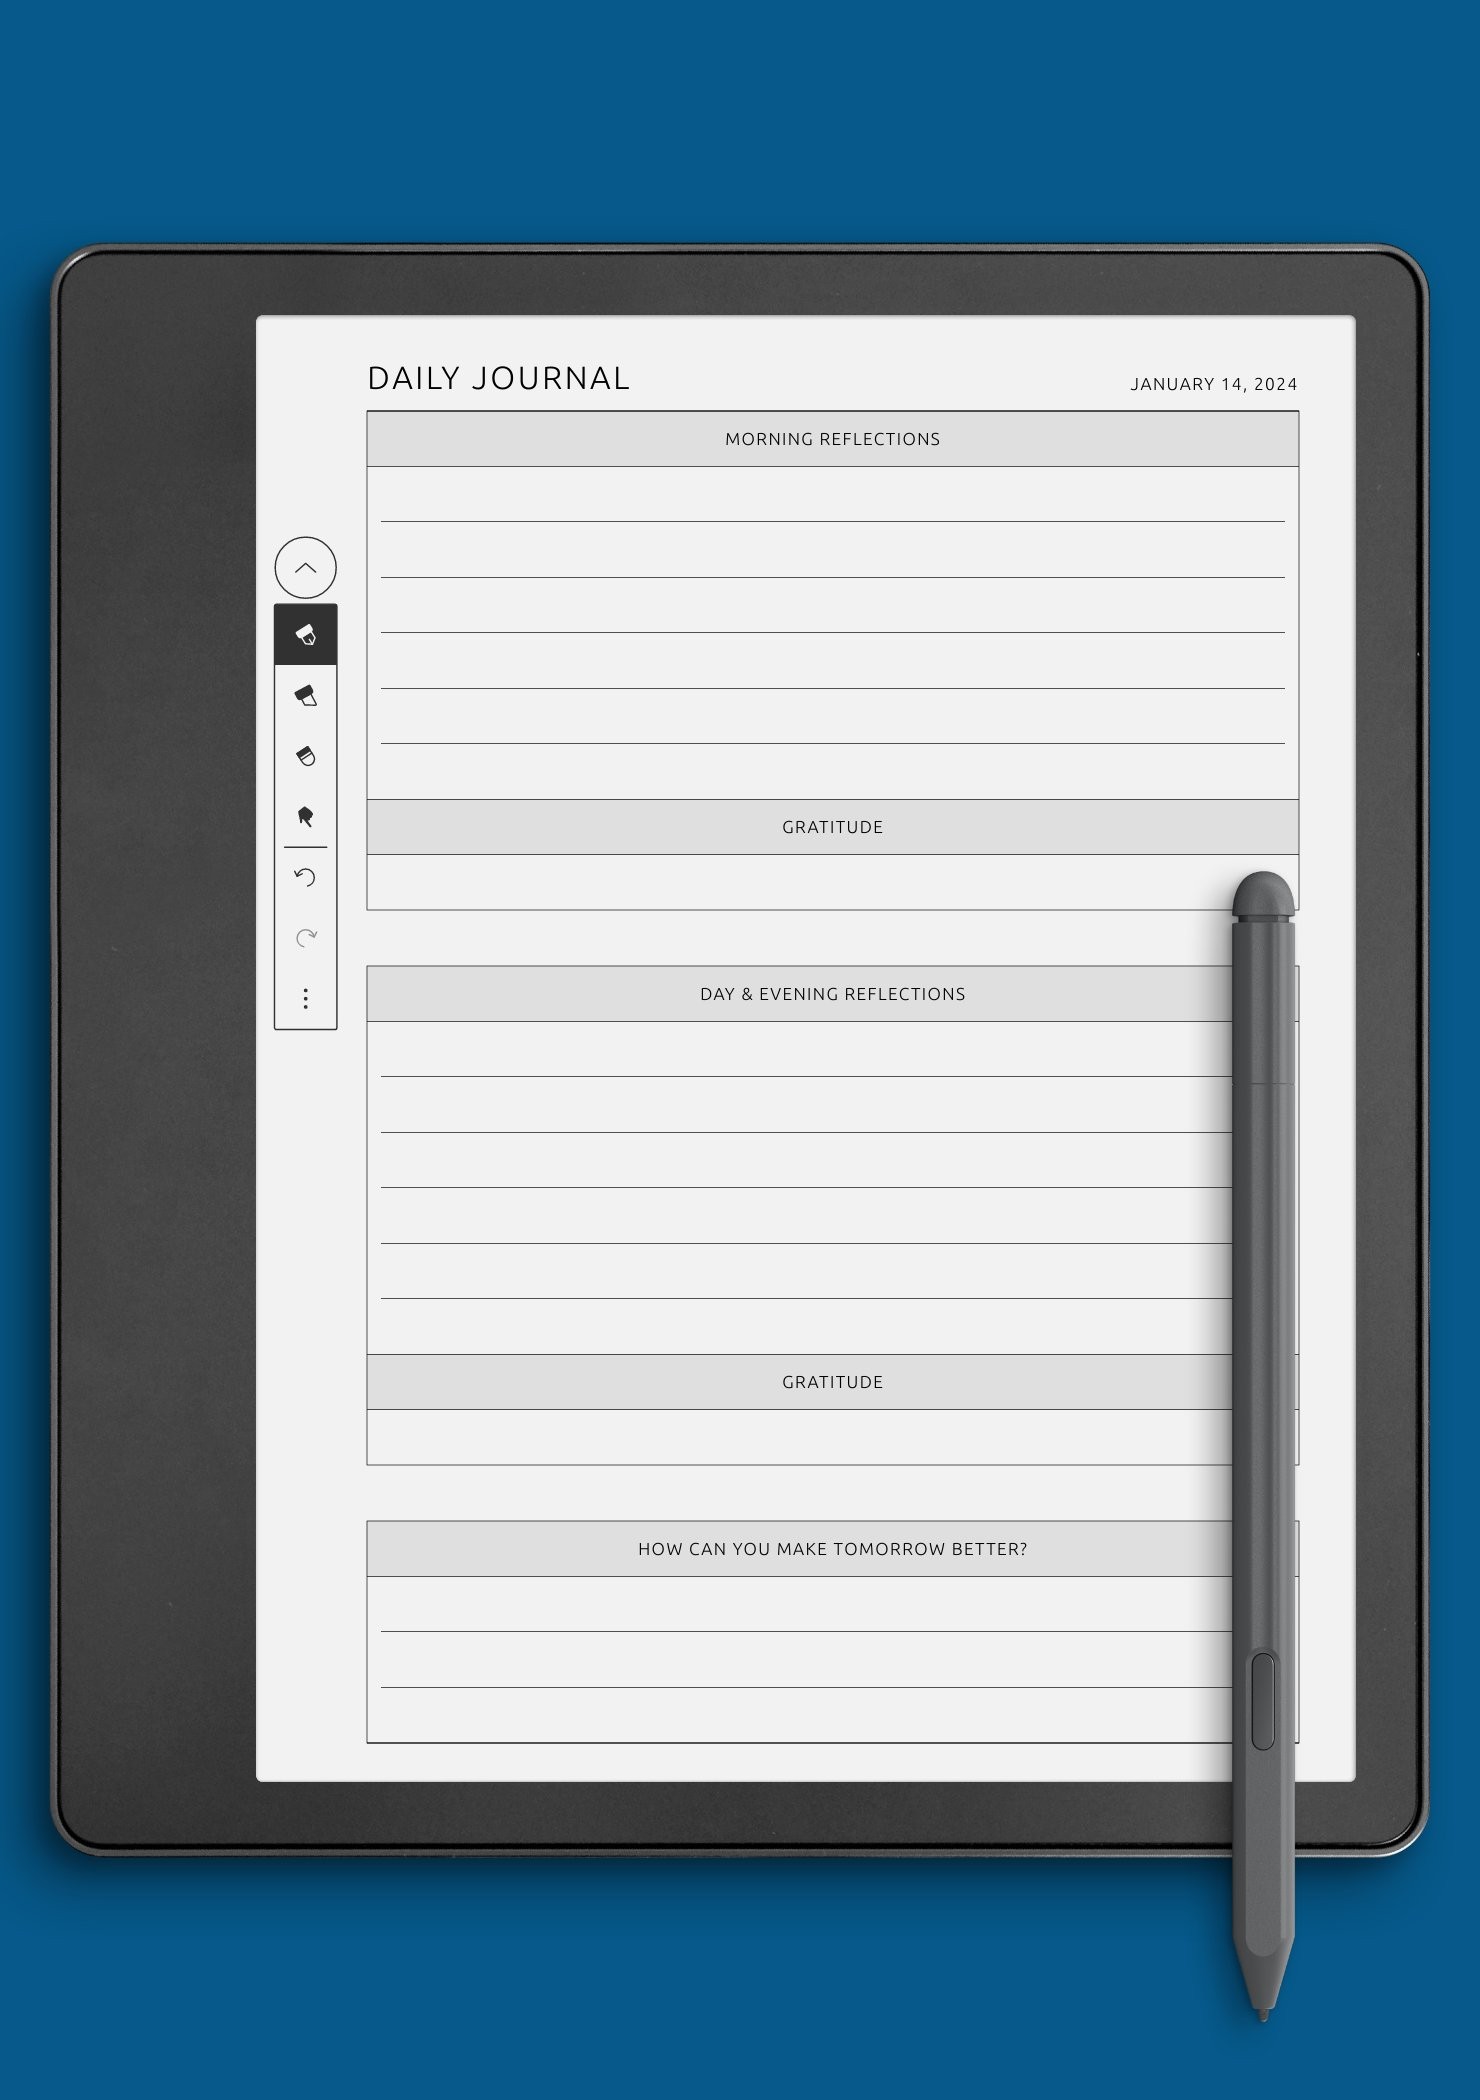 Daily Journal - 6+ Examples, Format, Pdf